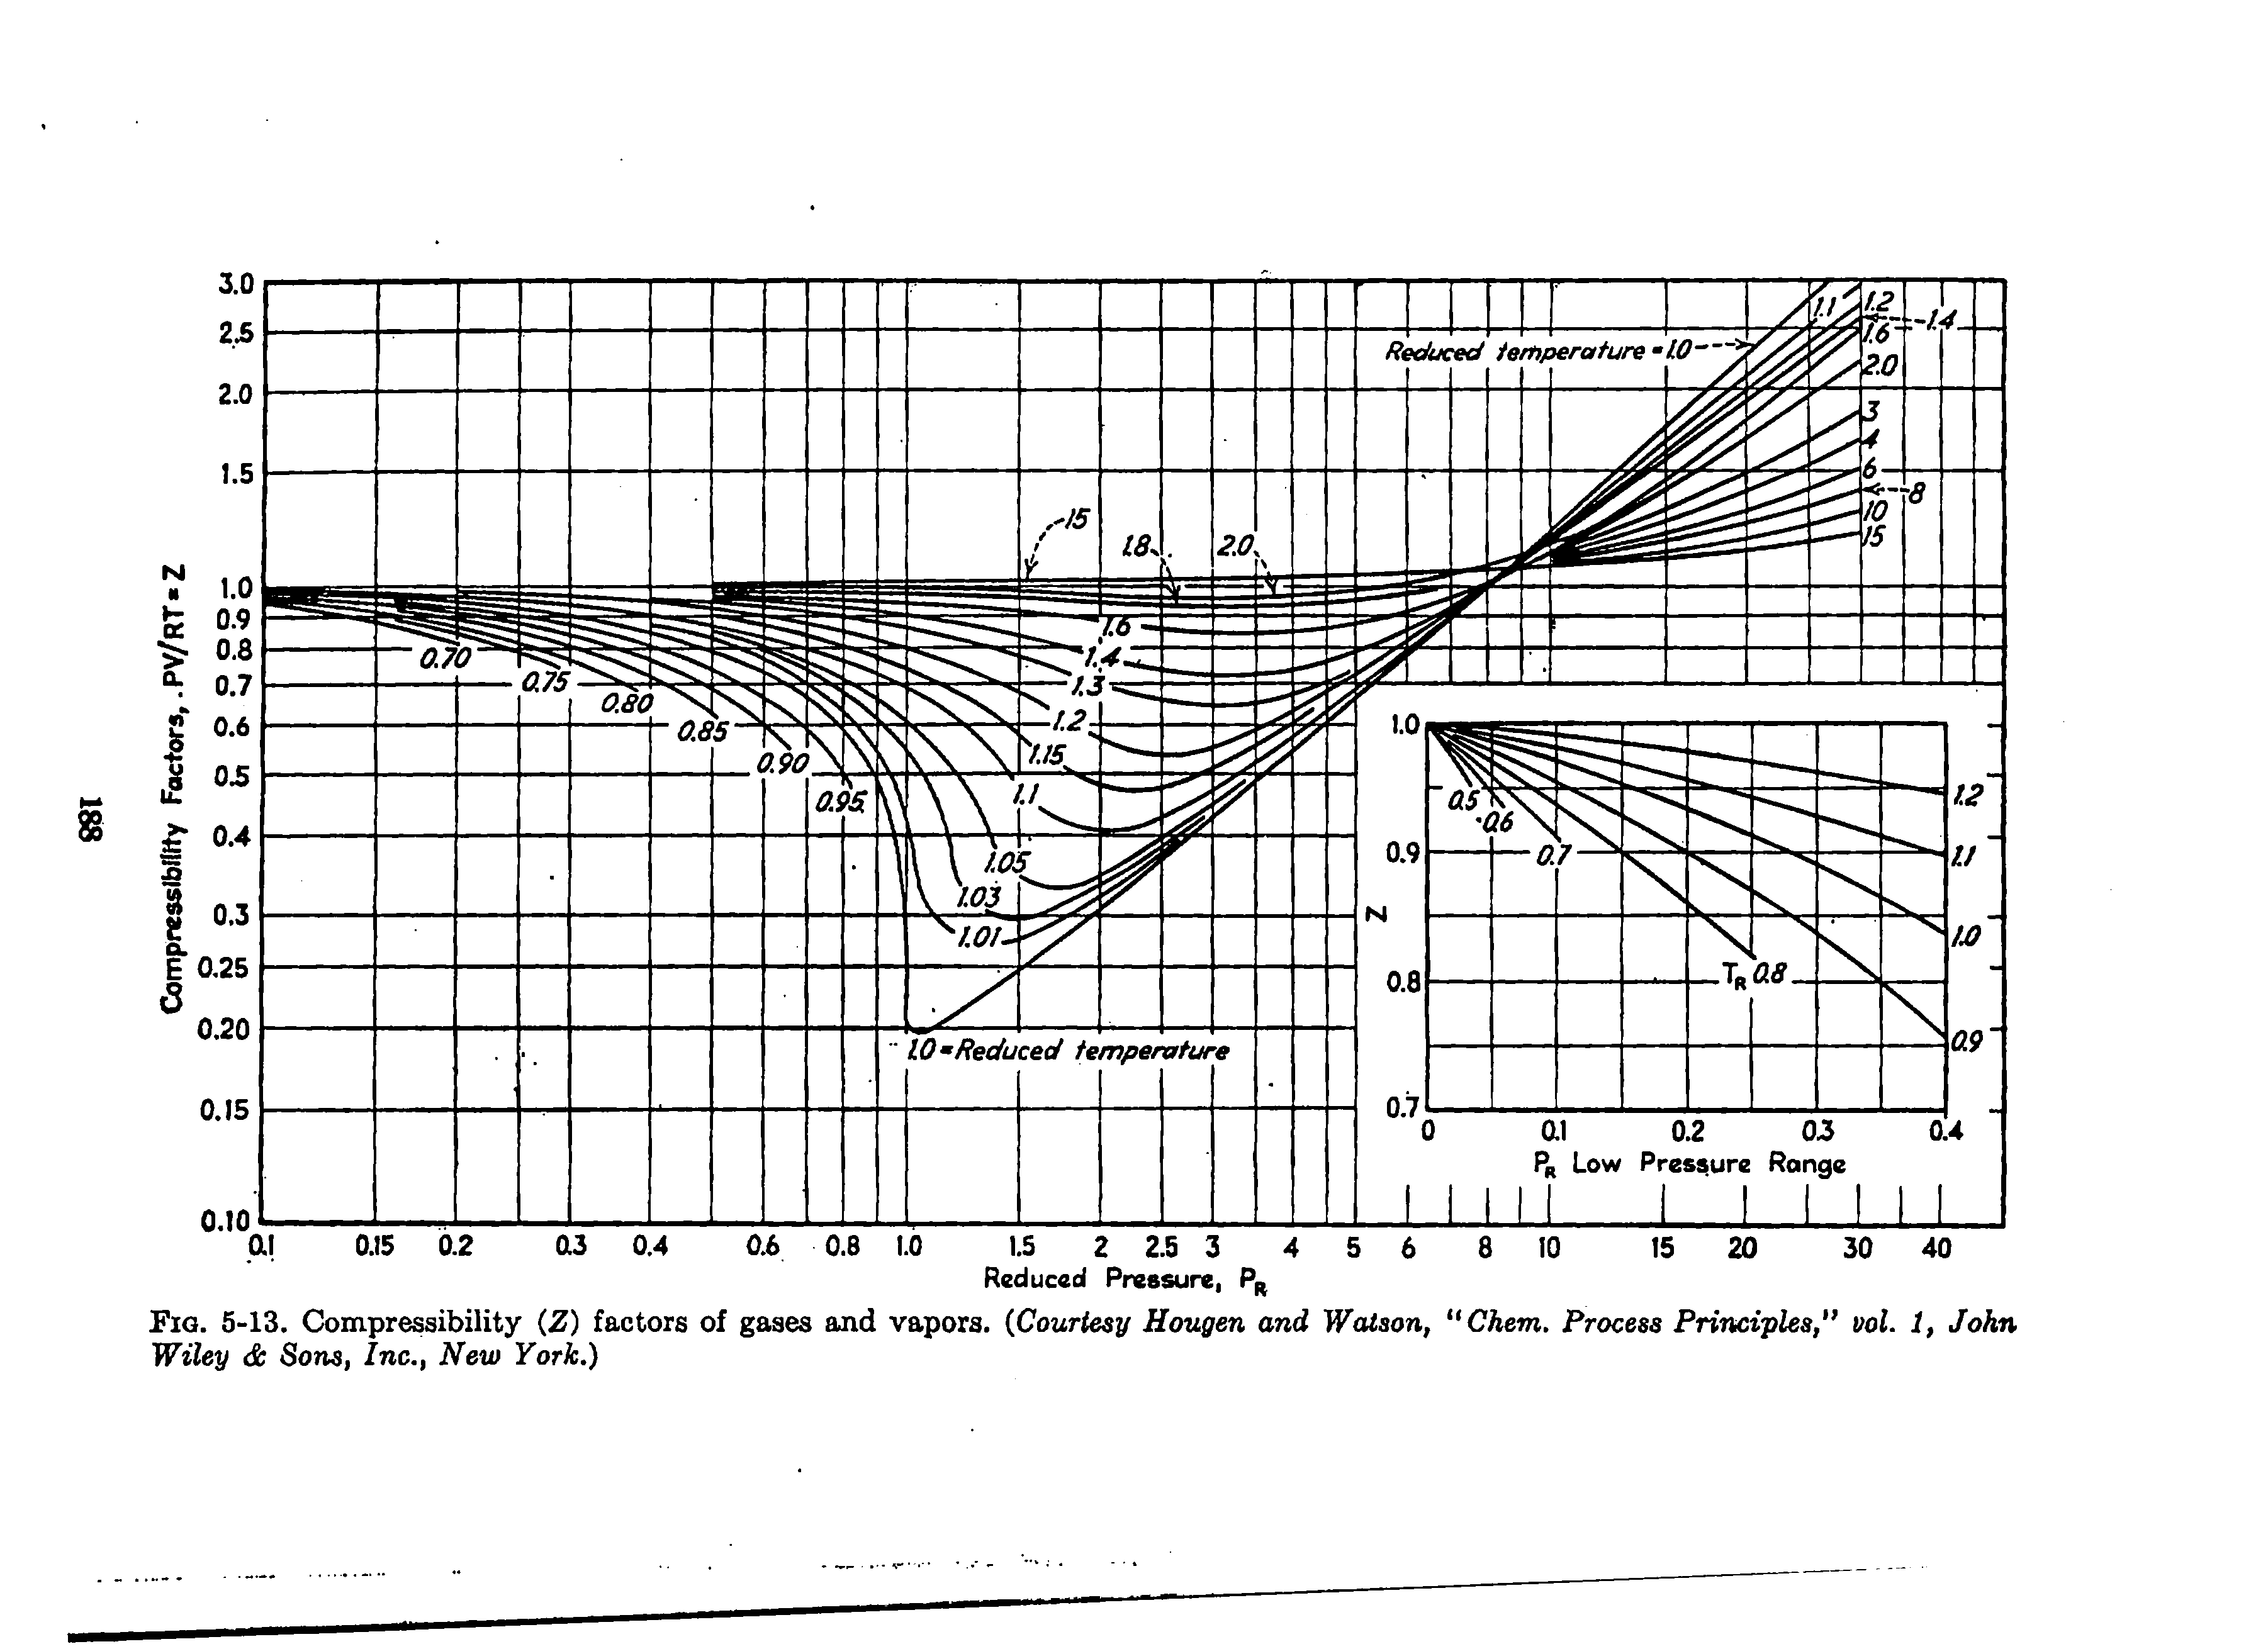 Fig. 5-13. Compressibility (Z) factors of gases and vapors. Courtesy Hougen and Watson, Chem. Process Principles, vol. 1, John Wiley 6c Sons, Inc., New York.)...